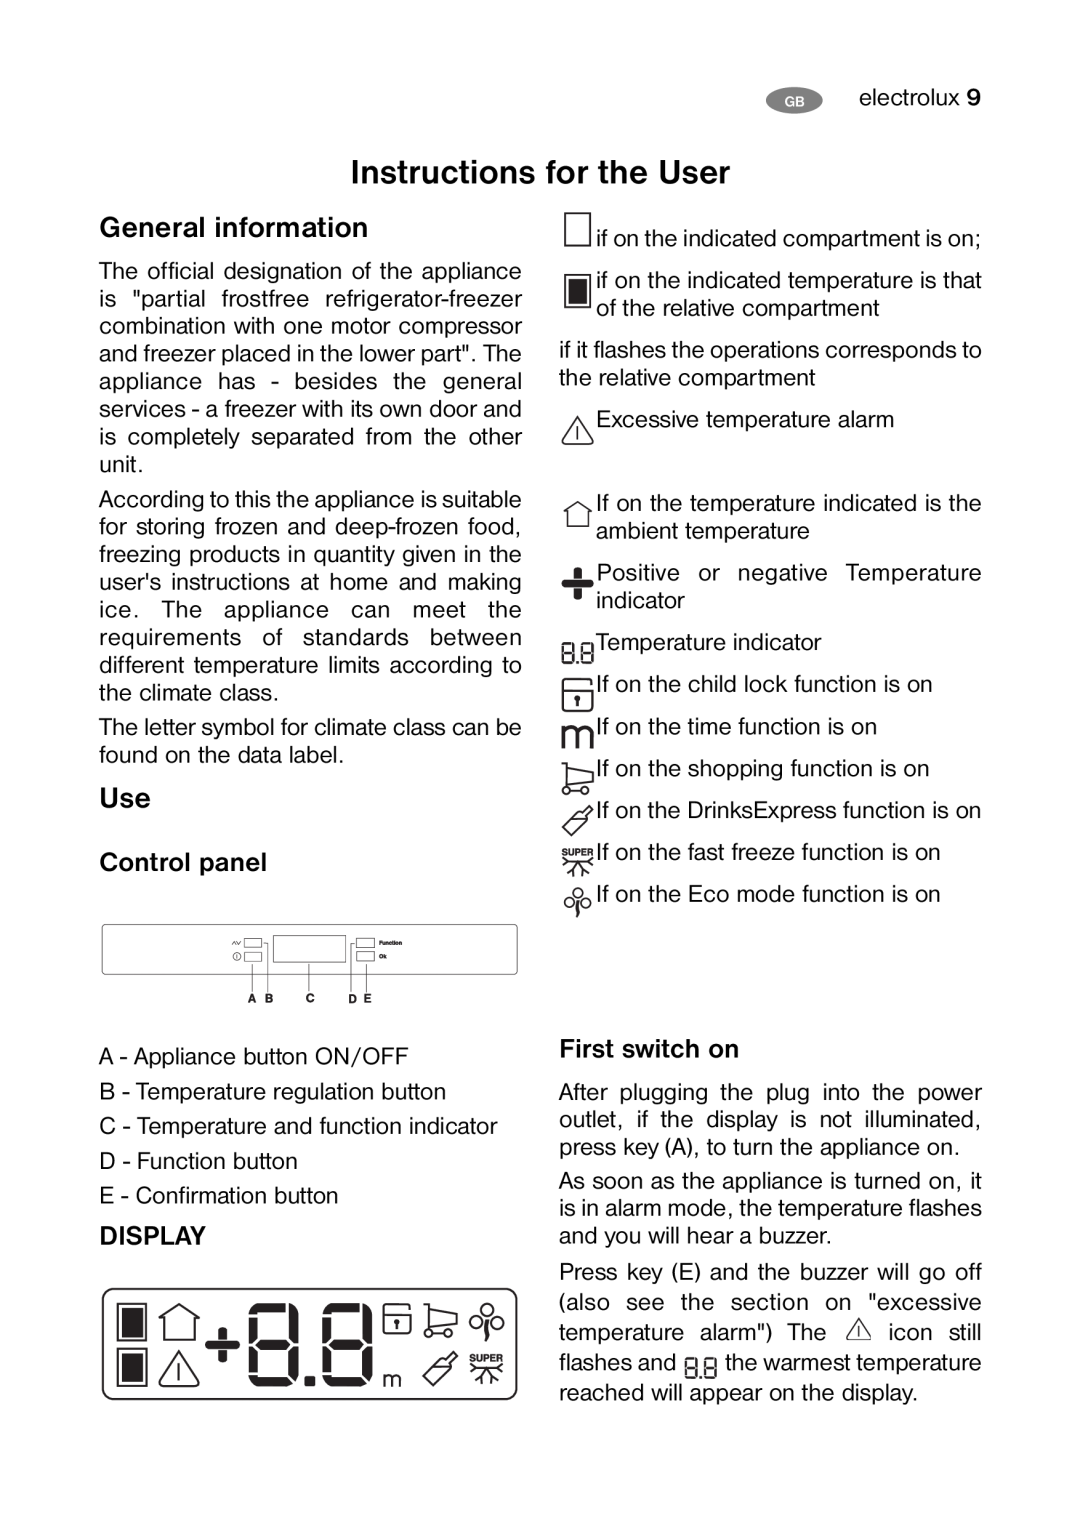 Electrolux ENB 38607 X user manual Instructions for the User, General information, Control panel, Display, First switch on 